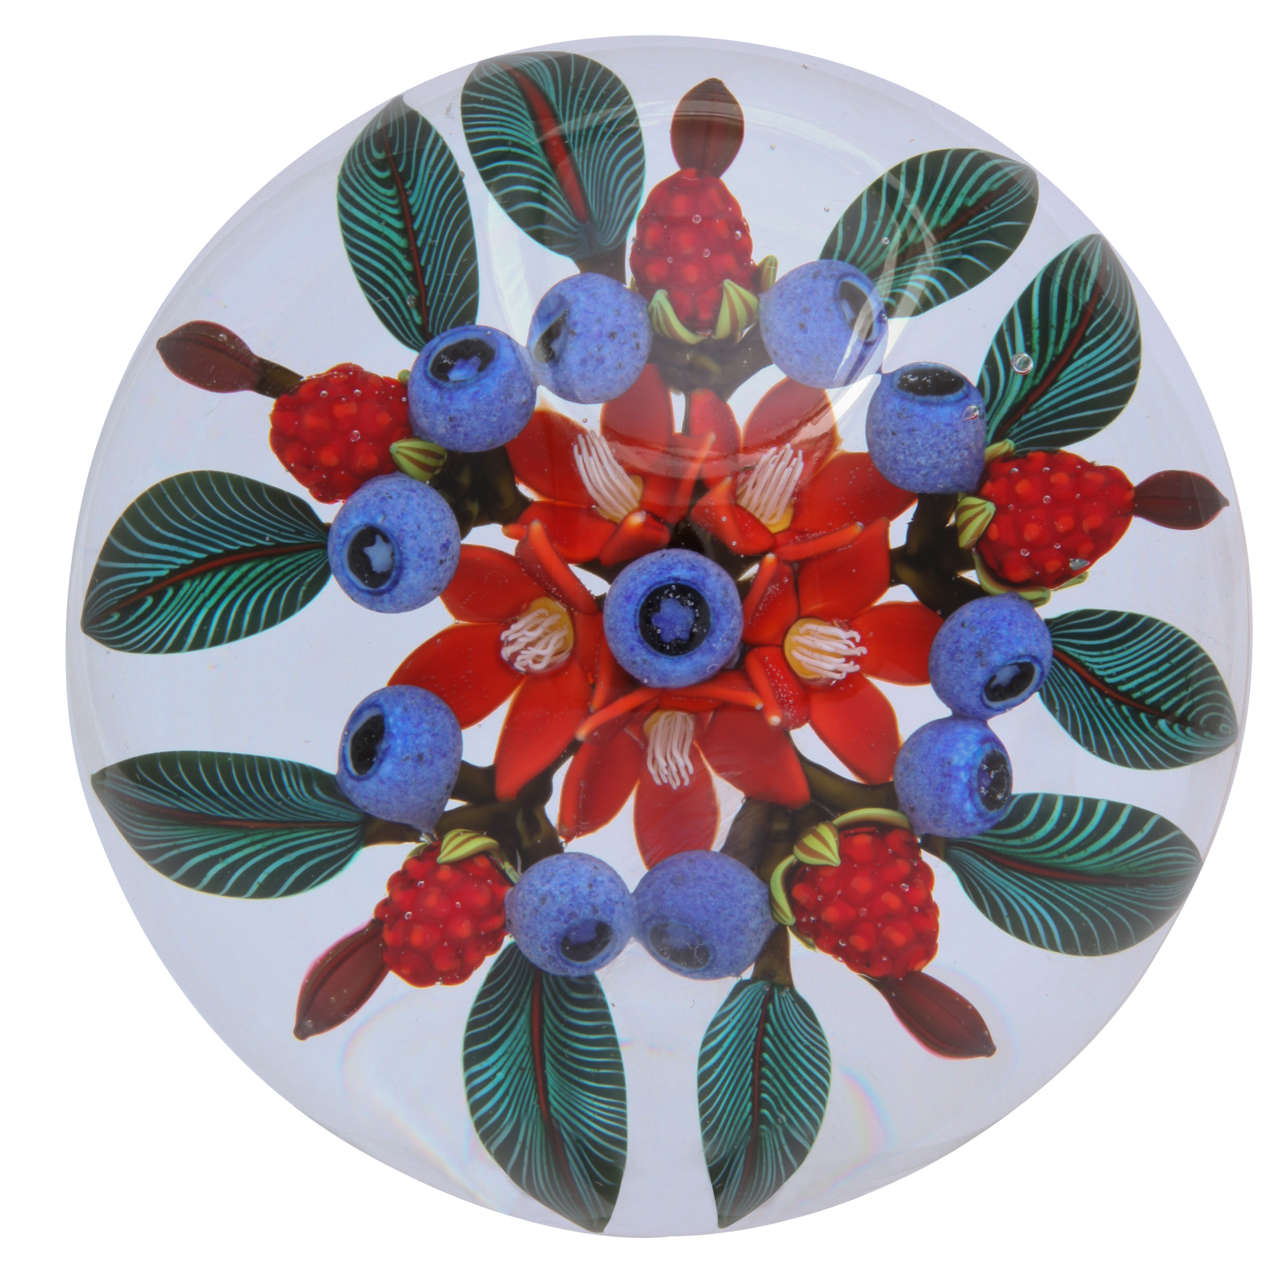 Colin Richardson, "Berry Kaleidoscope" Paperweight For Sale